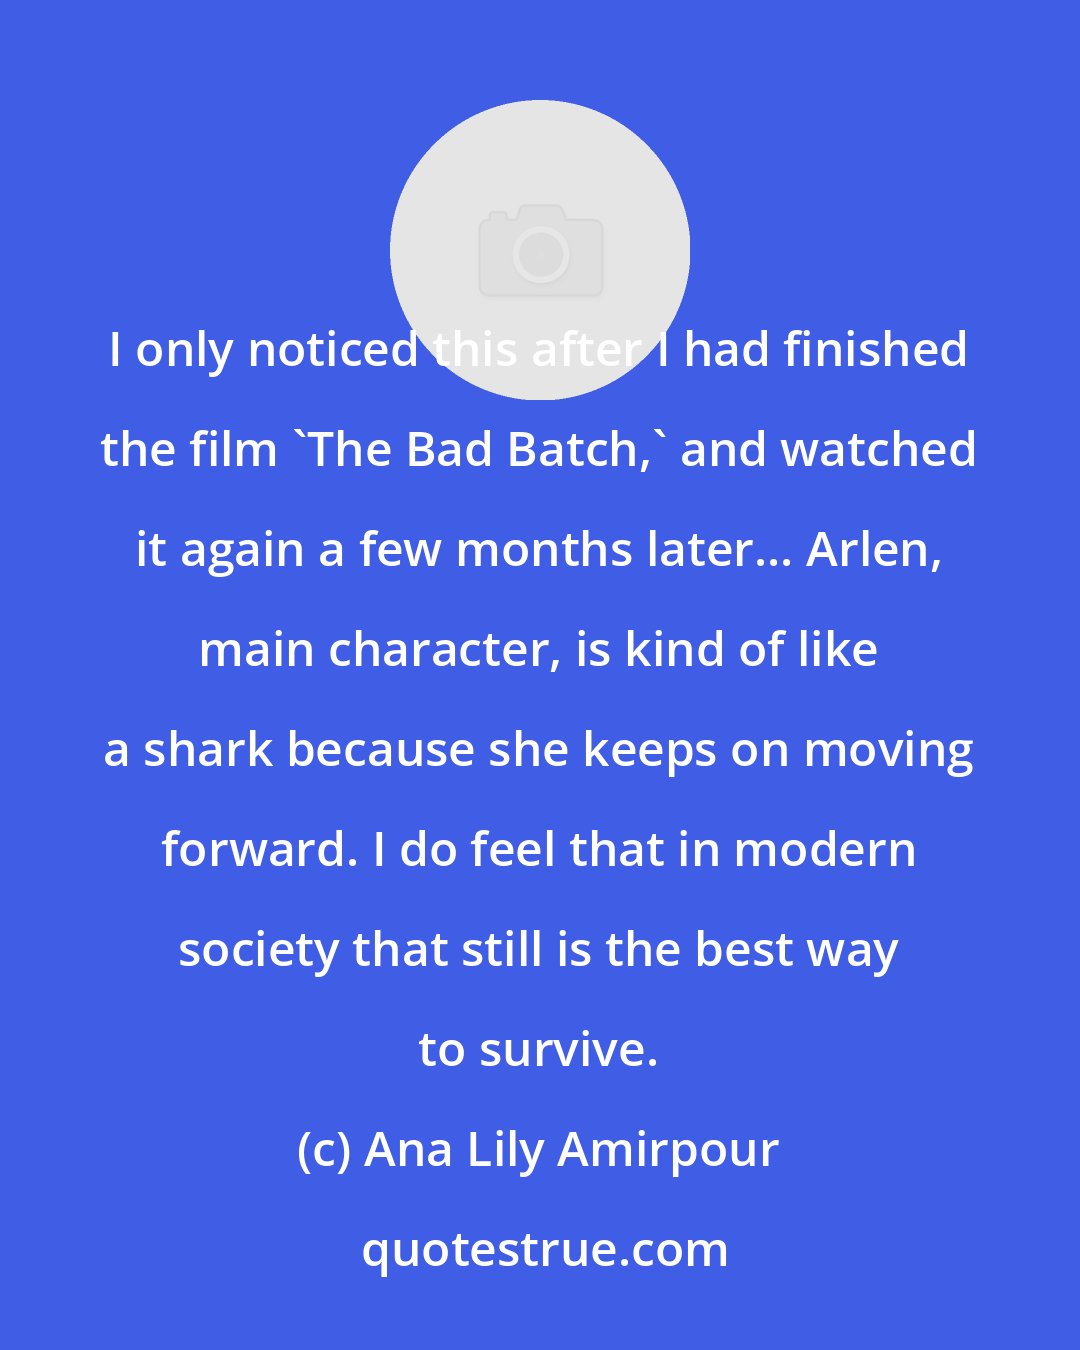 Ana Lily Amirpour: I only noticed this after I had finished the film 'The Bad Batch,' and watched it again a few months later... Arlen, main character, is kind of like a shark because she keeps on moving forward. I do feel that in modern society that still is the best way to survive.